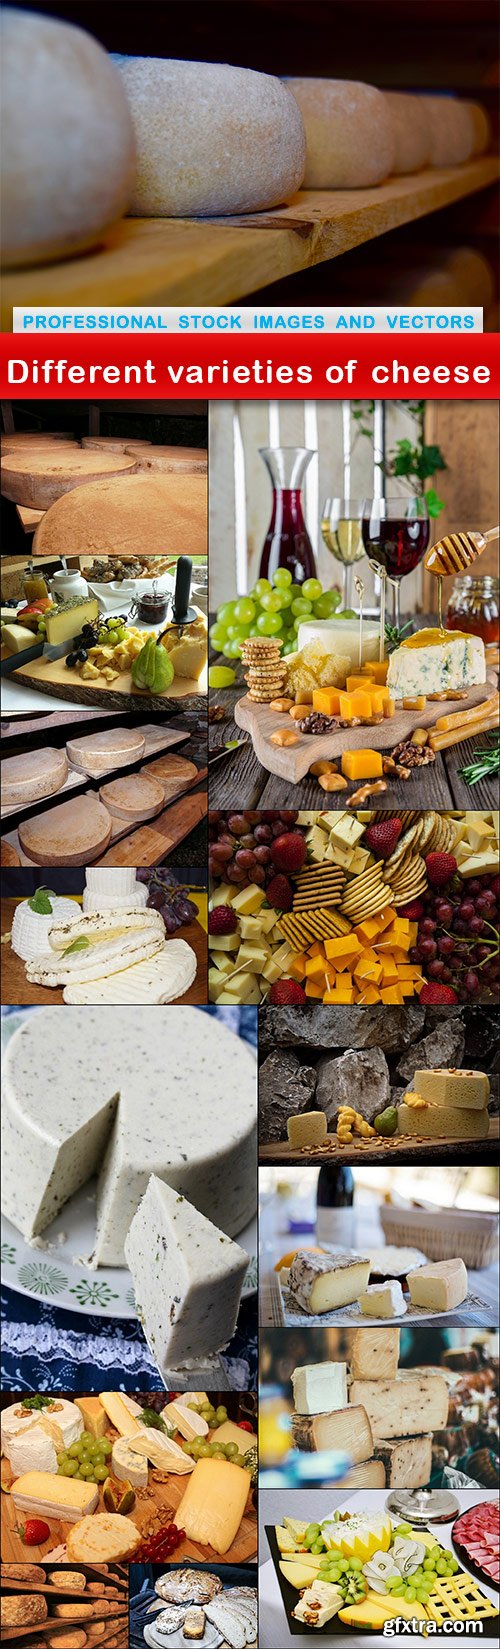 Different varieties of cheese - 15 UHQ JPEG